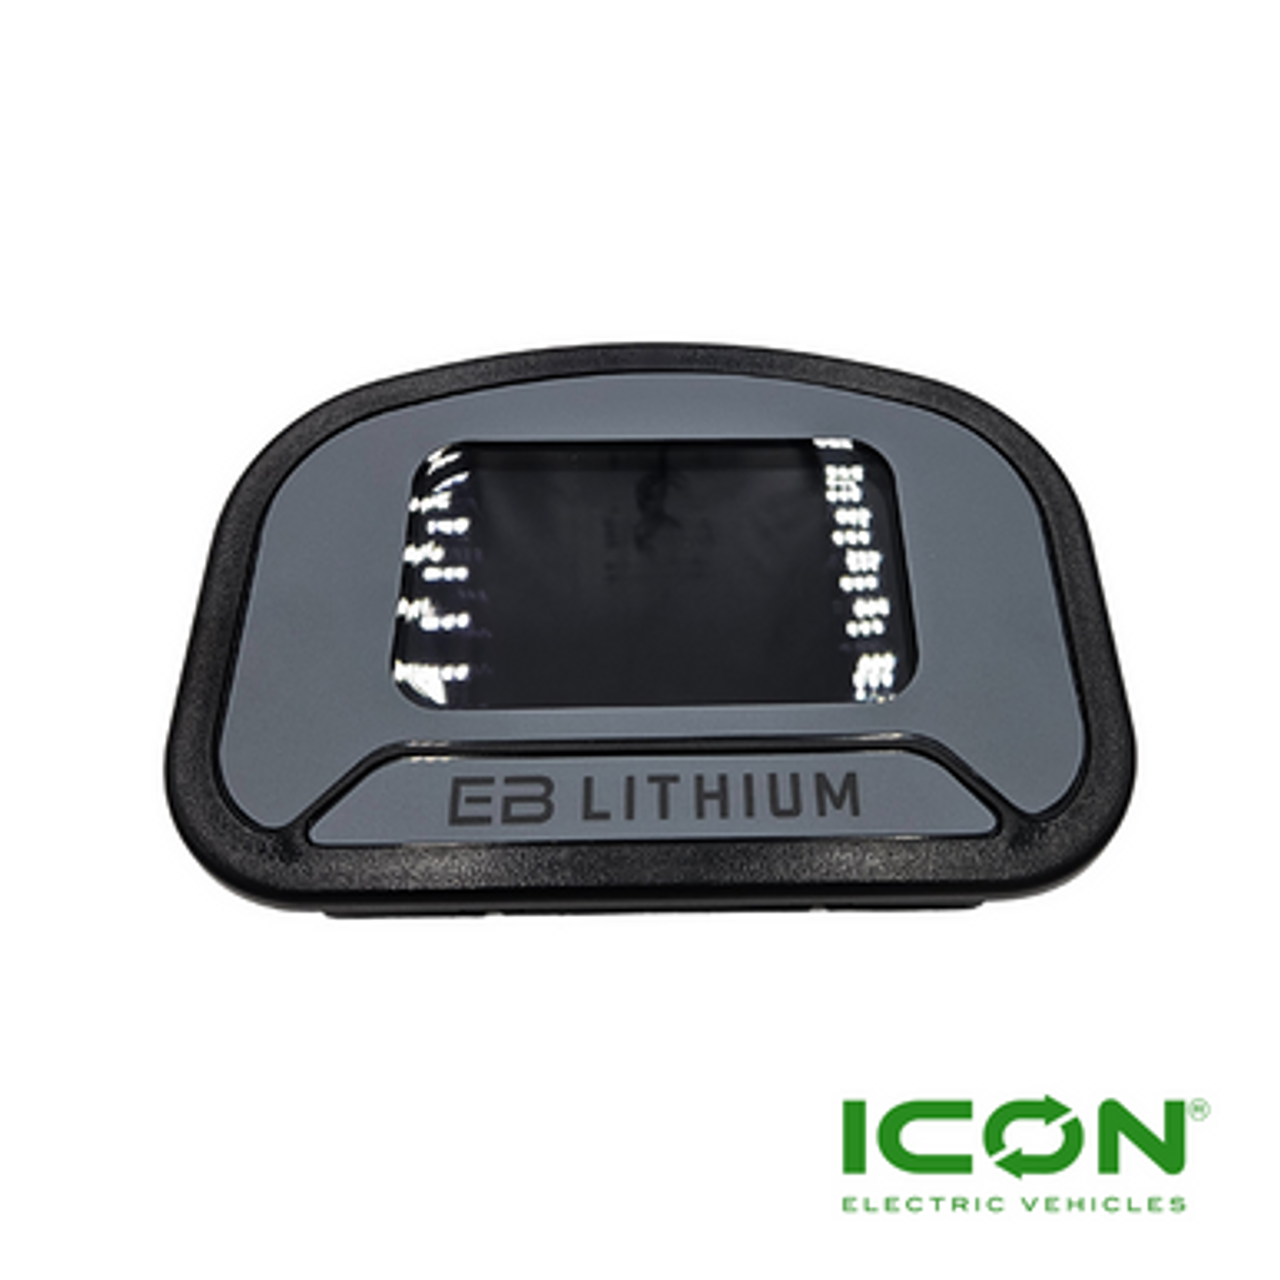 Eco Battery Golf Cart Digital Display / Battery Indicator for ICON Golf Carts 2021-2023, CHGR-715-IC-OPT